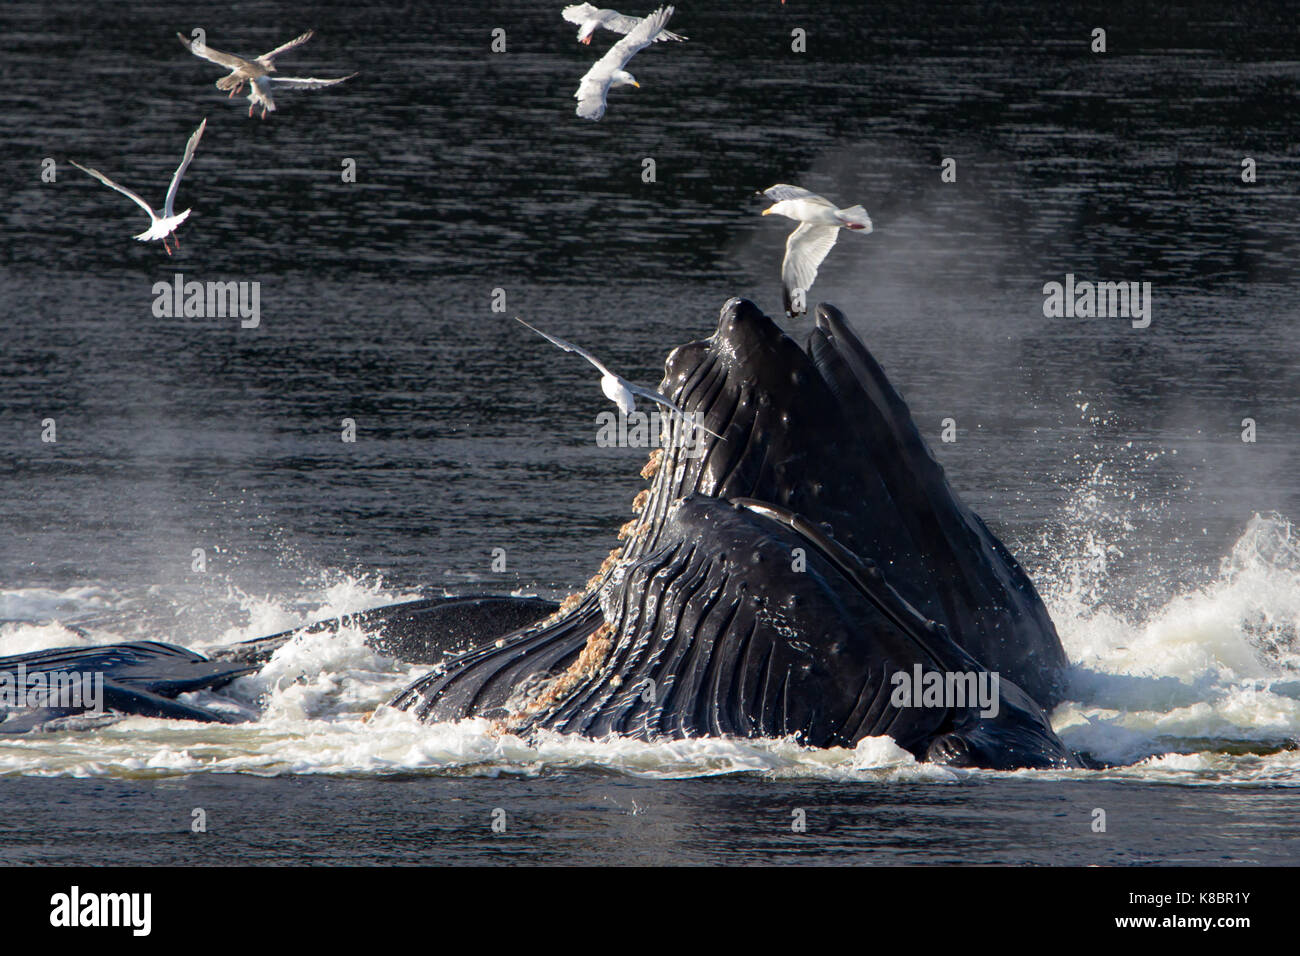 Humpback whales work together in cooperative bubble net feeding to eat herring in Southeast Alaska, USA Stock Photo